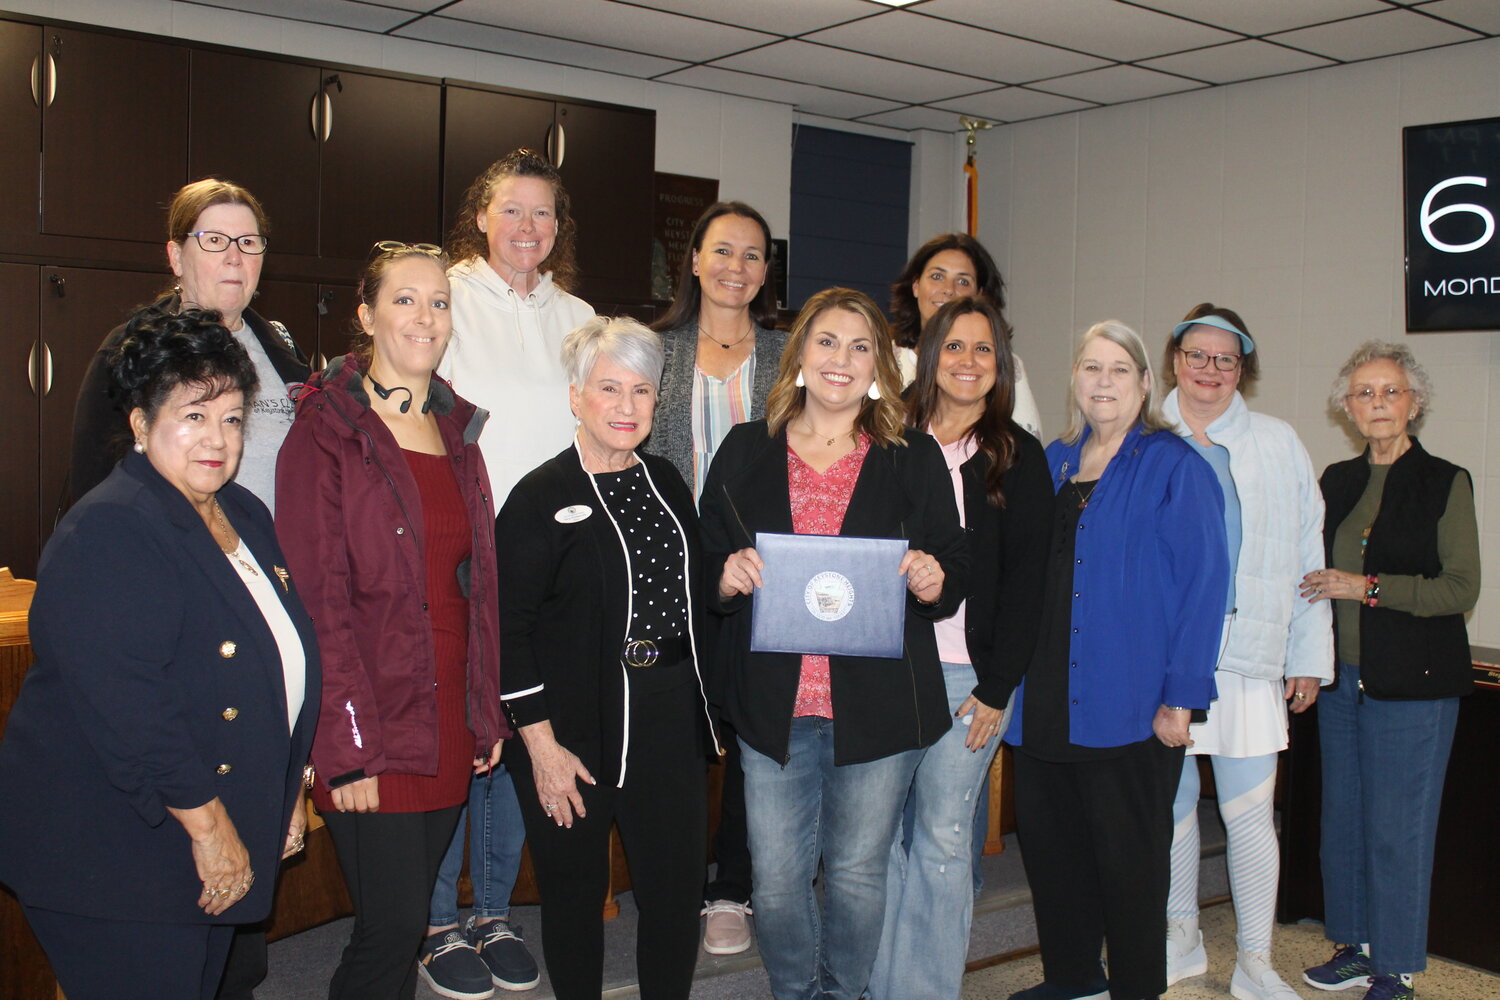 Mayor Nina Rodenroth led the proclamation that recognized the centennial of the Keystone Heights Woman’s Club. Rodenroth herself is a new member.